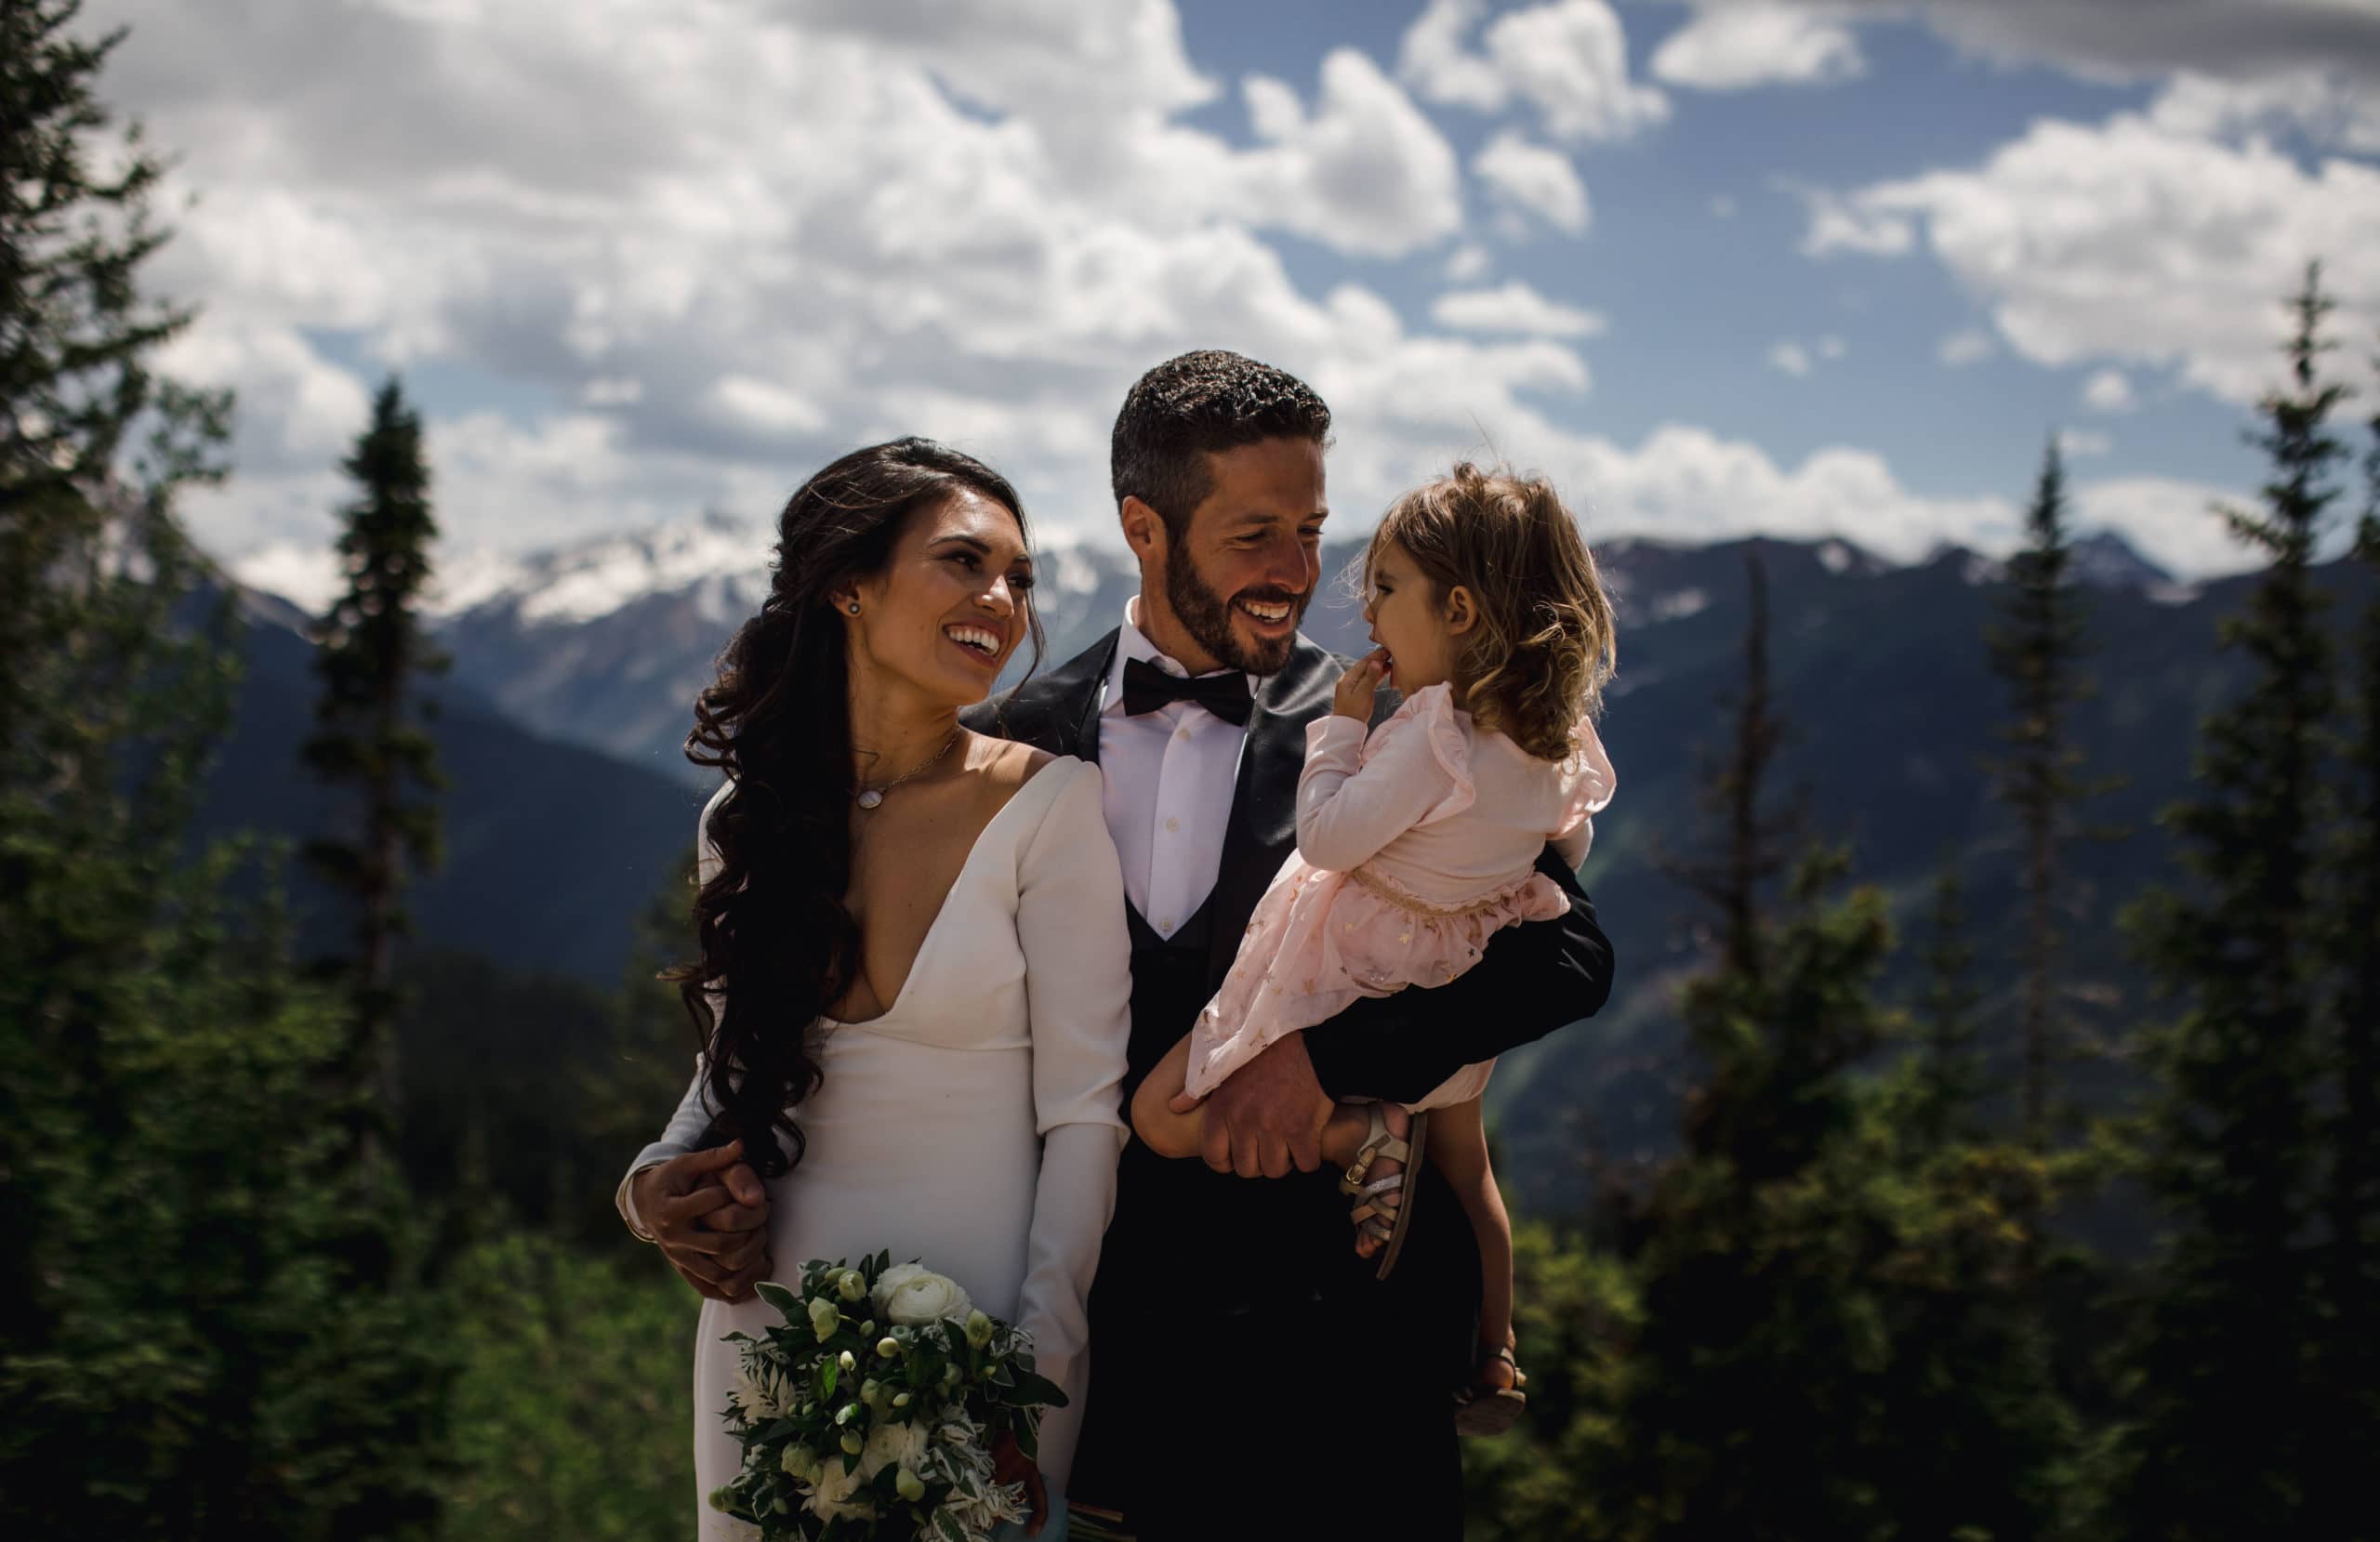 Eloping with children can really bring the whole family together to celebrate a union of two parents.